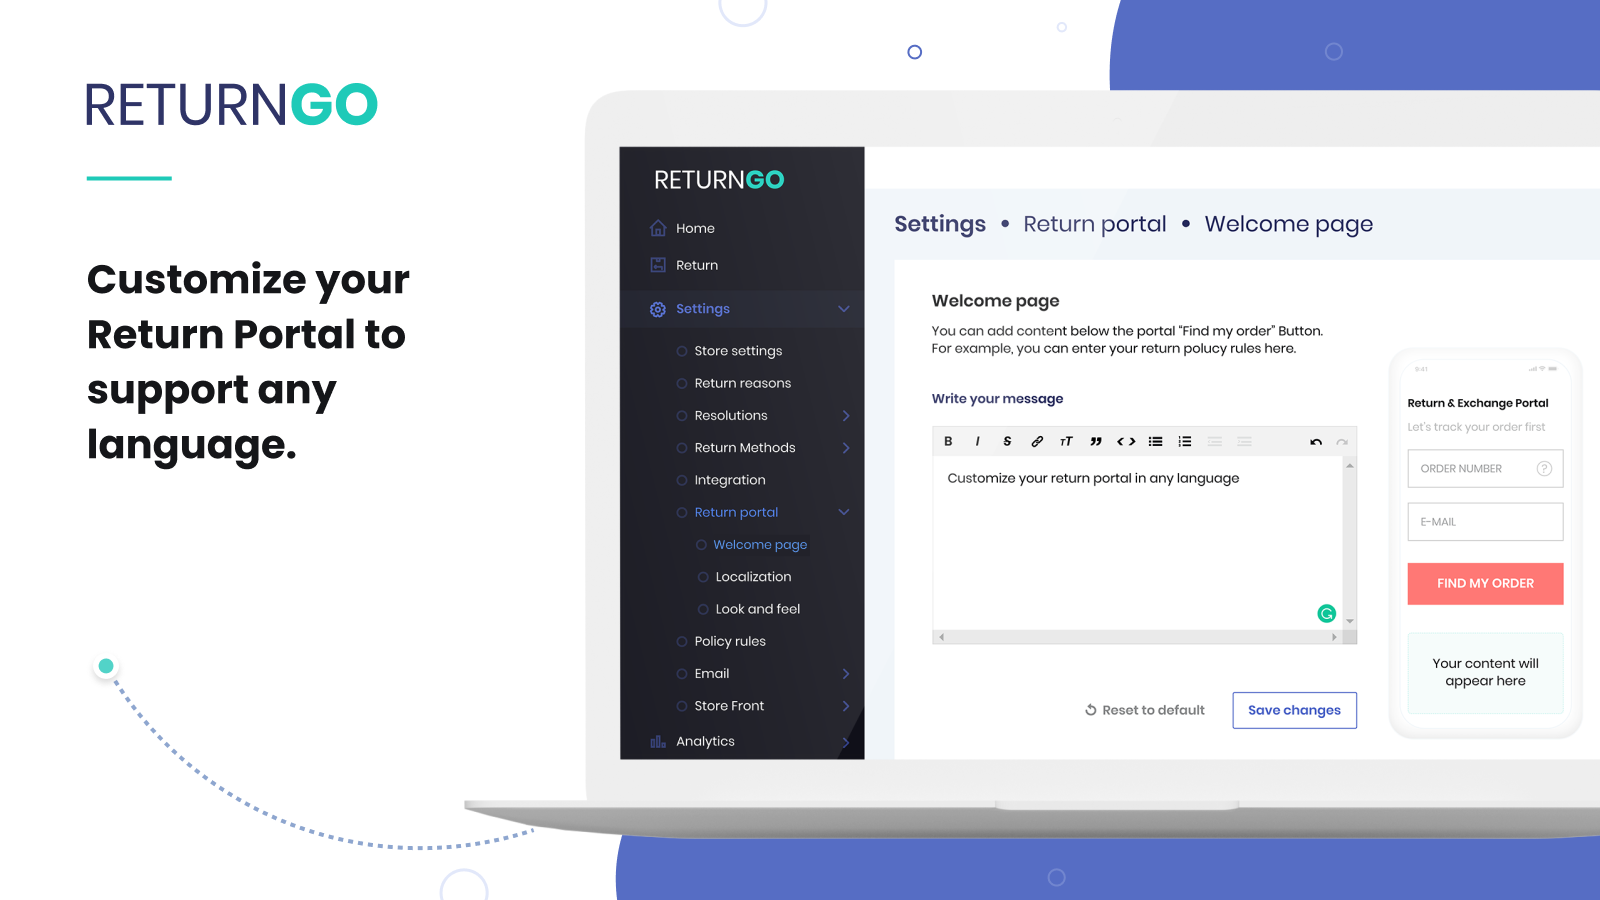 Customize to your Returns & Exchange Portal